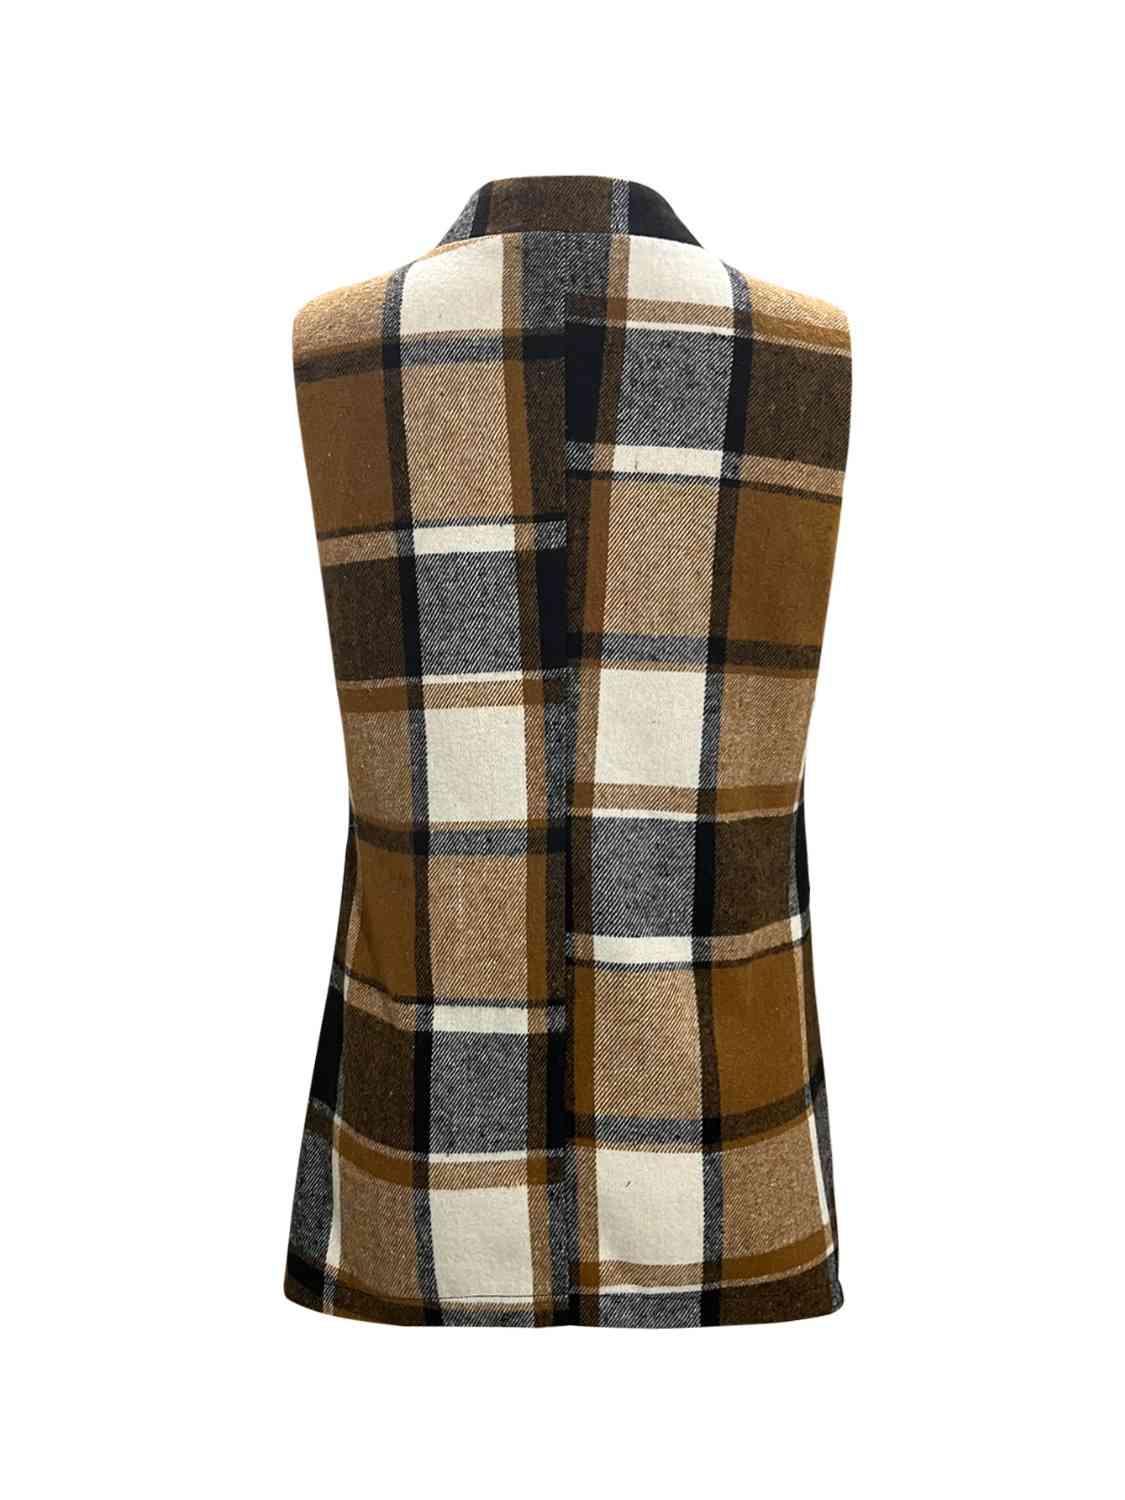 a brown and black plaid vest on a white background